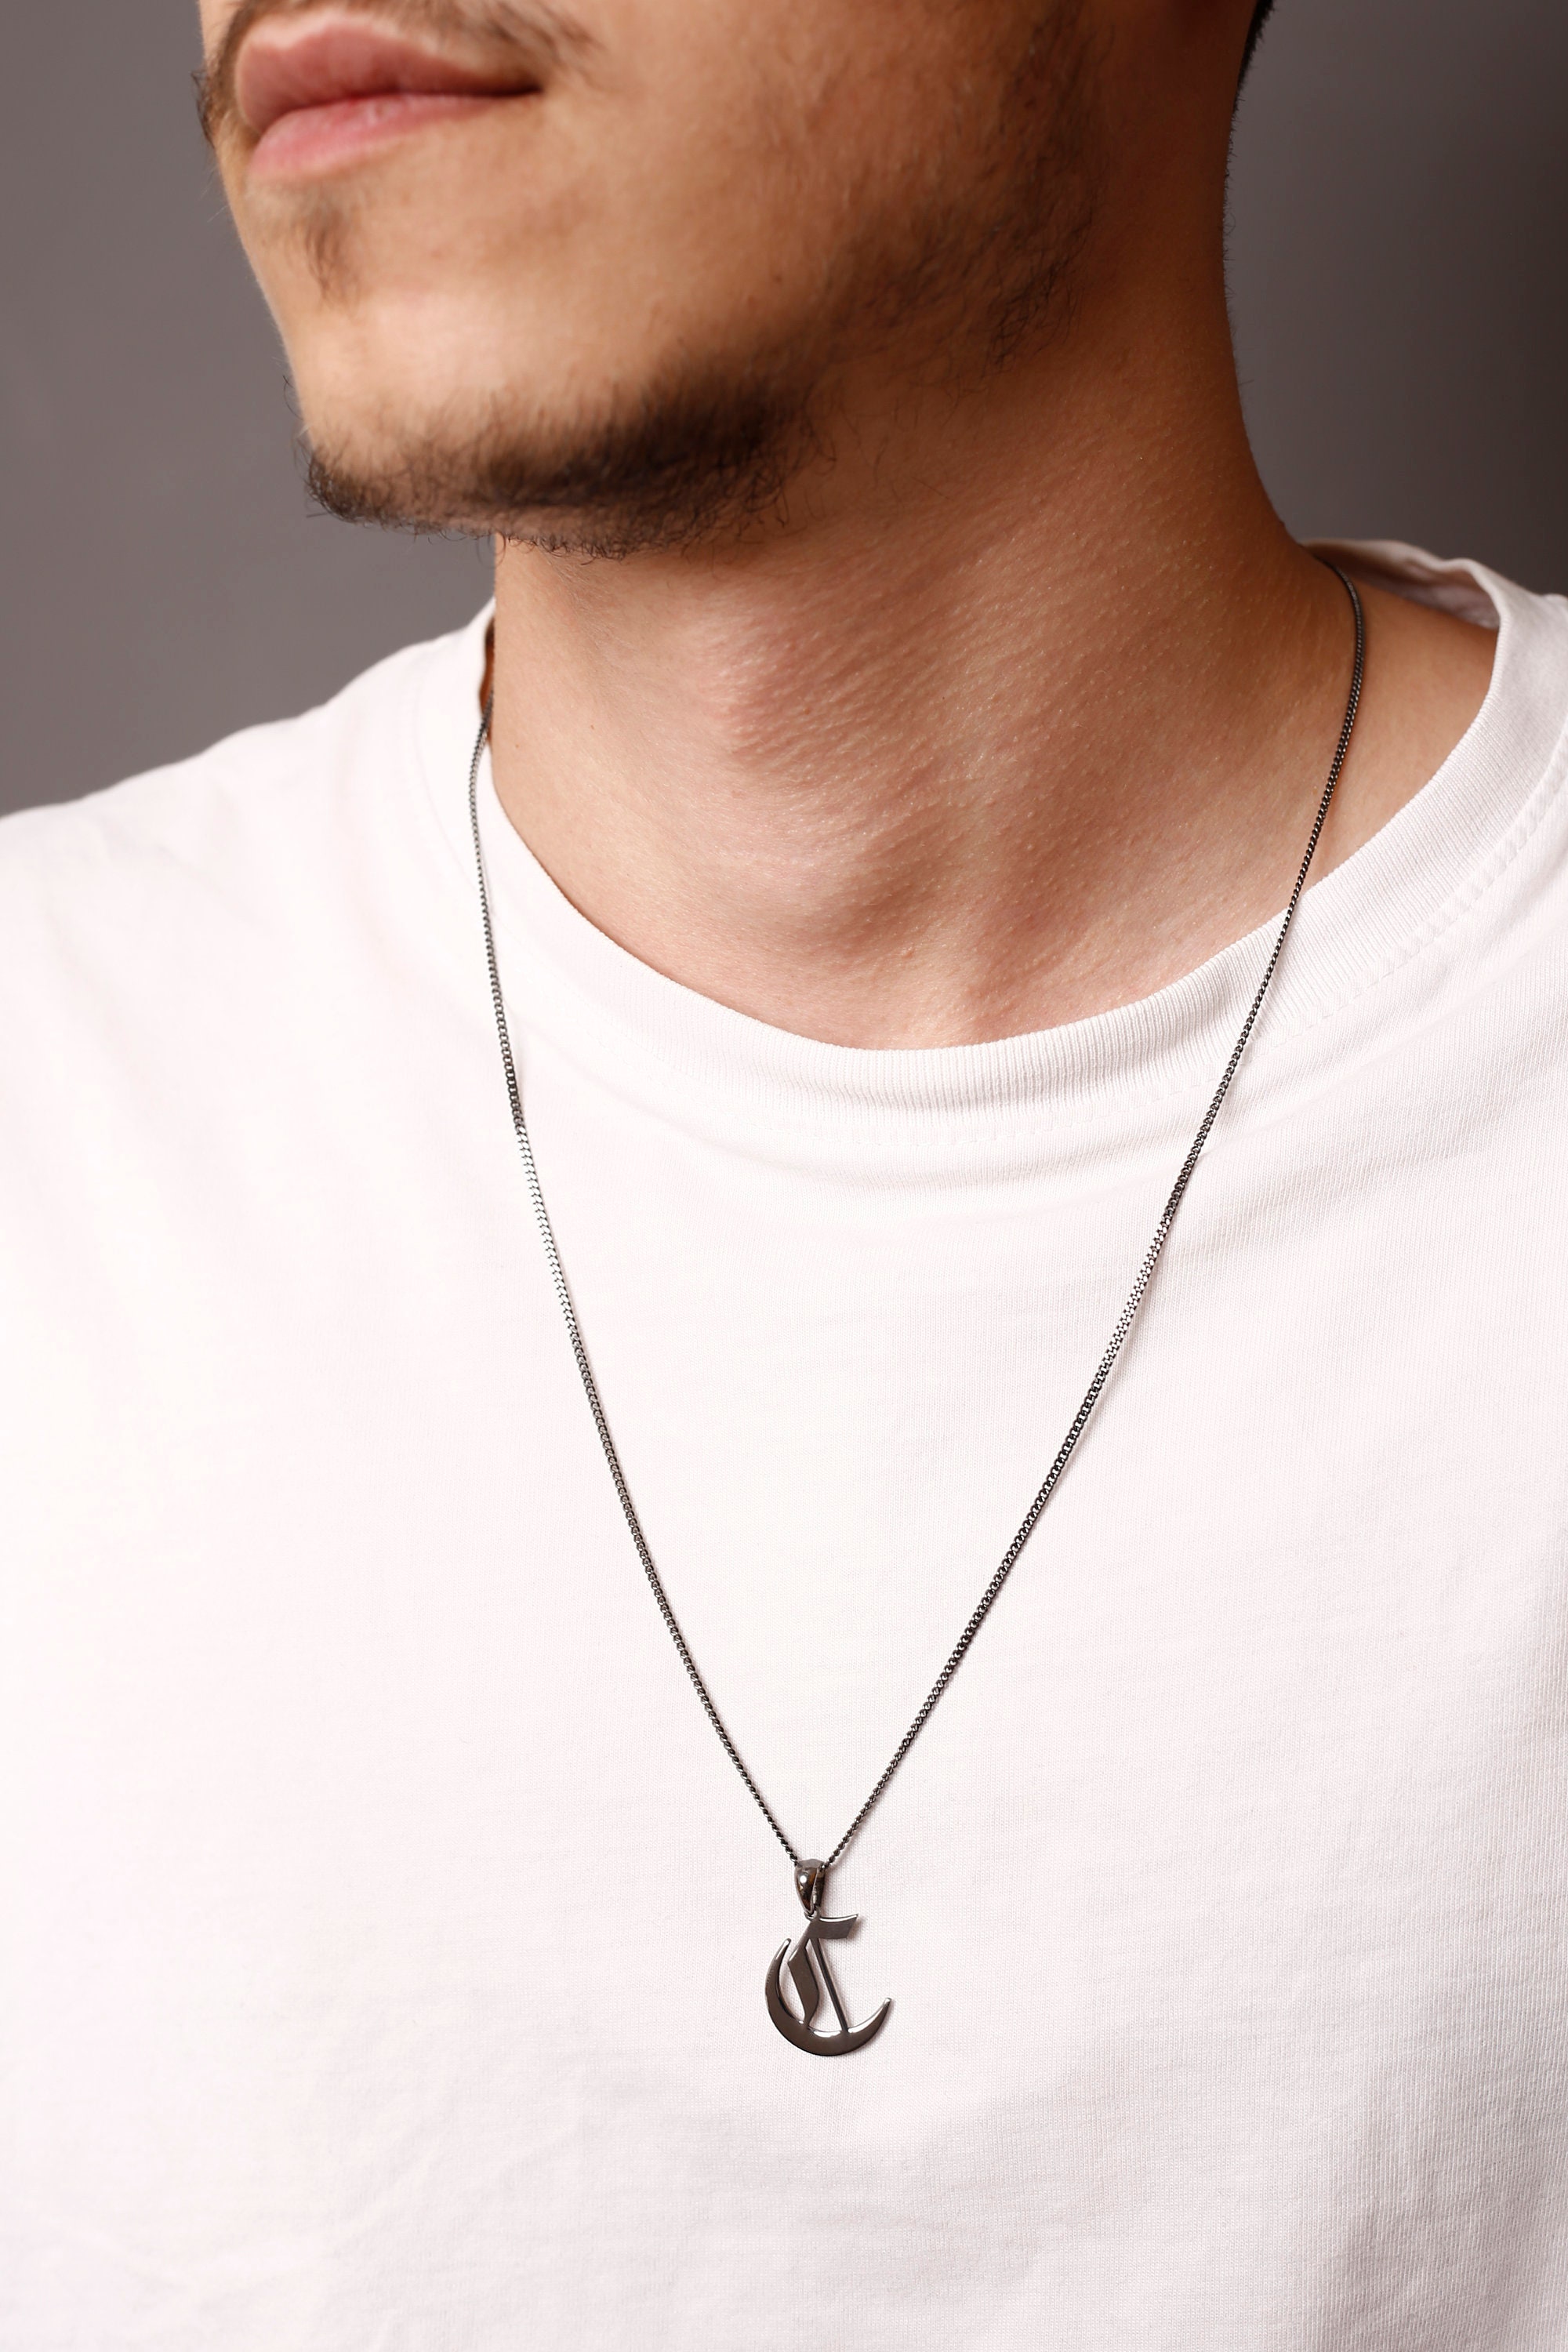 Nymerianoble Layered Initial Necklaces for Men Stainless Steel Initial  Pendant Necklace for Men Boys Layering Cuban Chain Letter E Necklace Men  Jewelry Gifts for Boyfriend Dad Son | Amazon.com